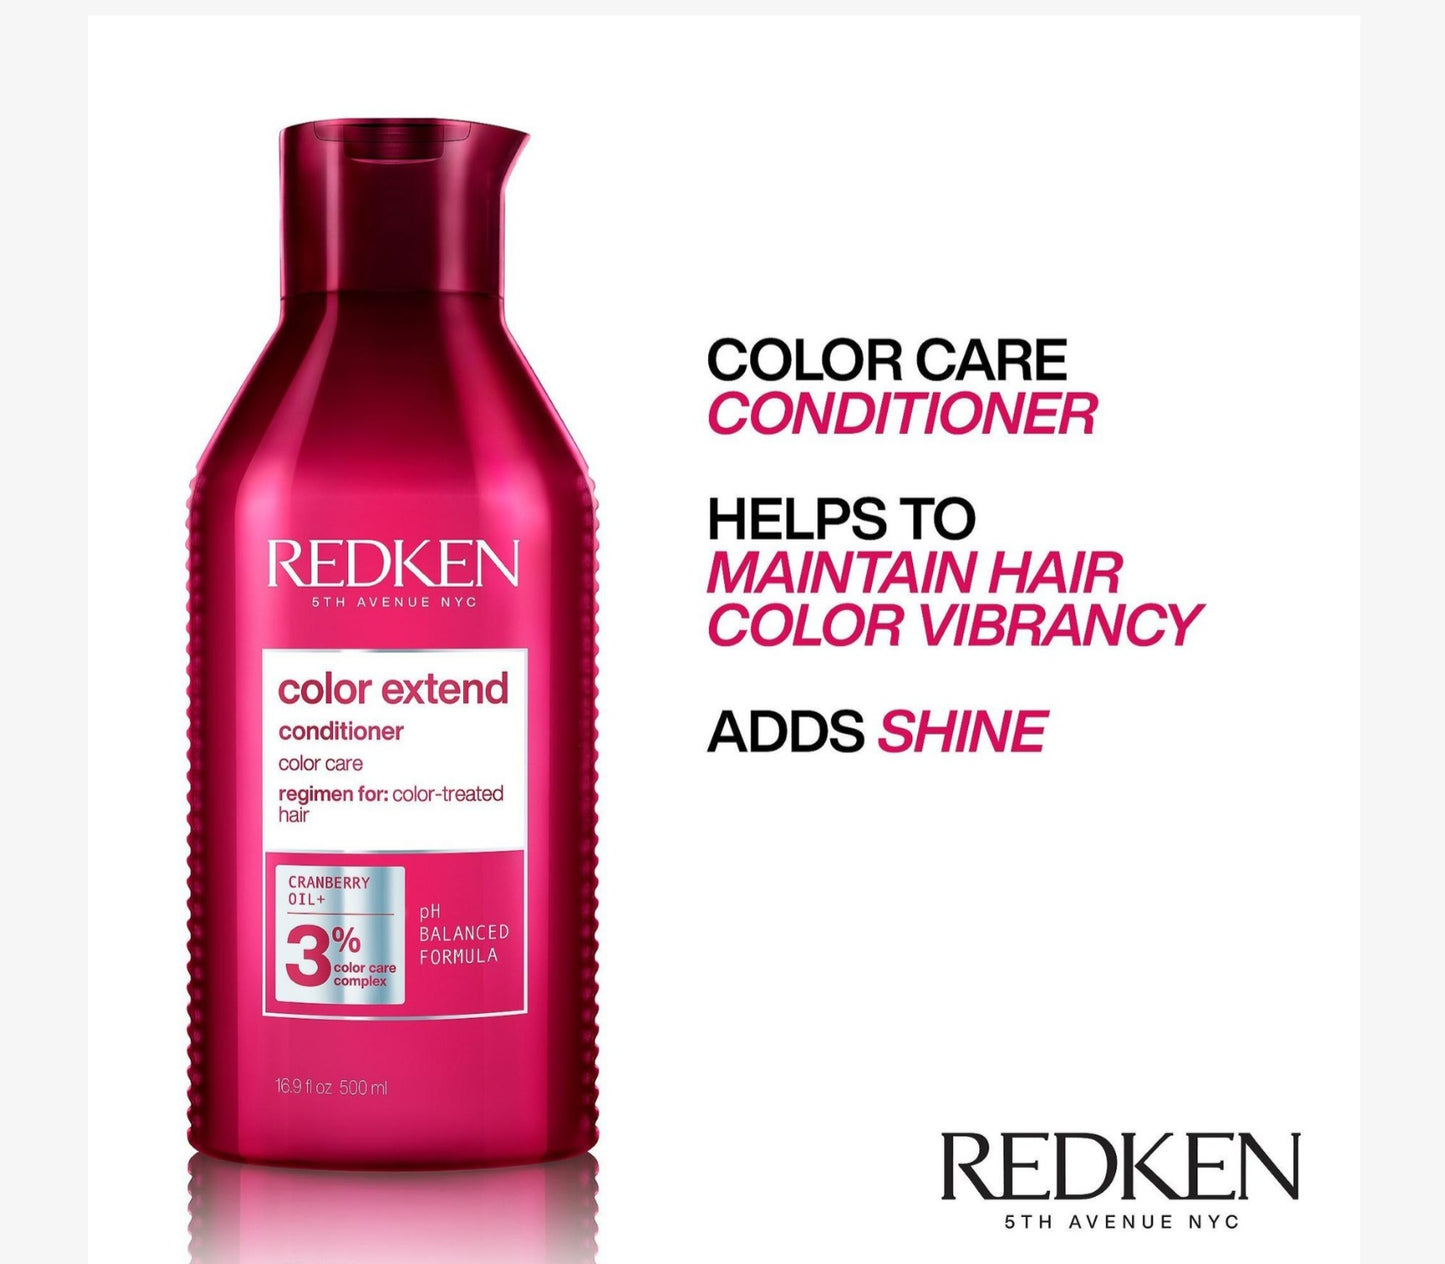 Redken Color Extend Conditioner for Color Treated Hair